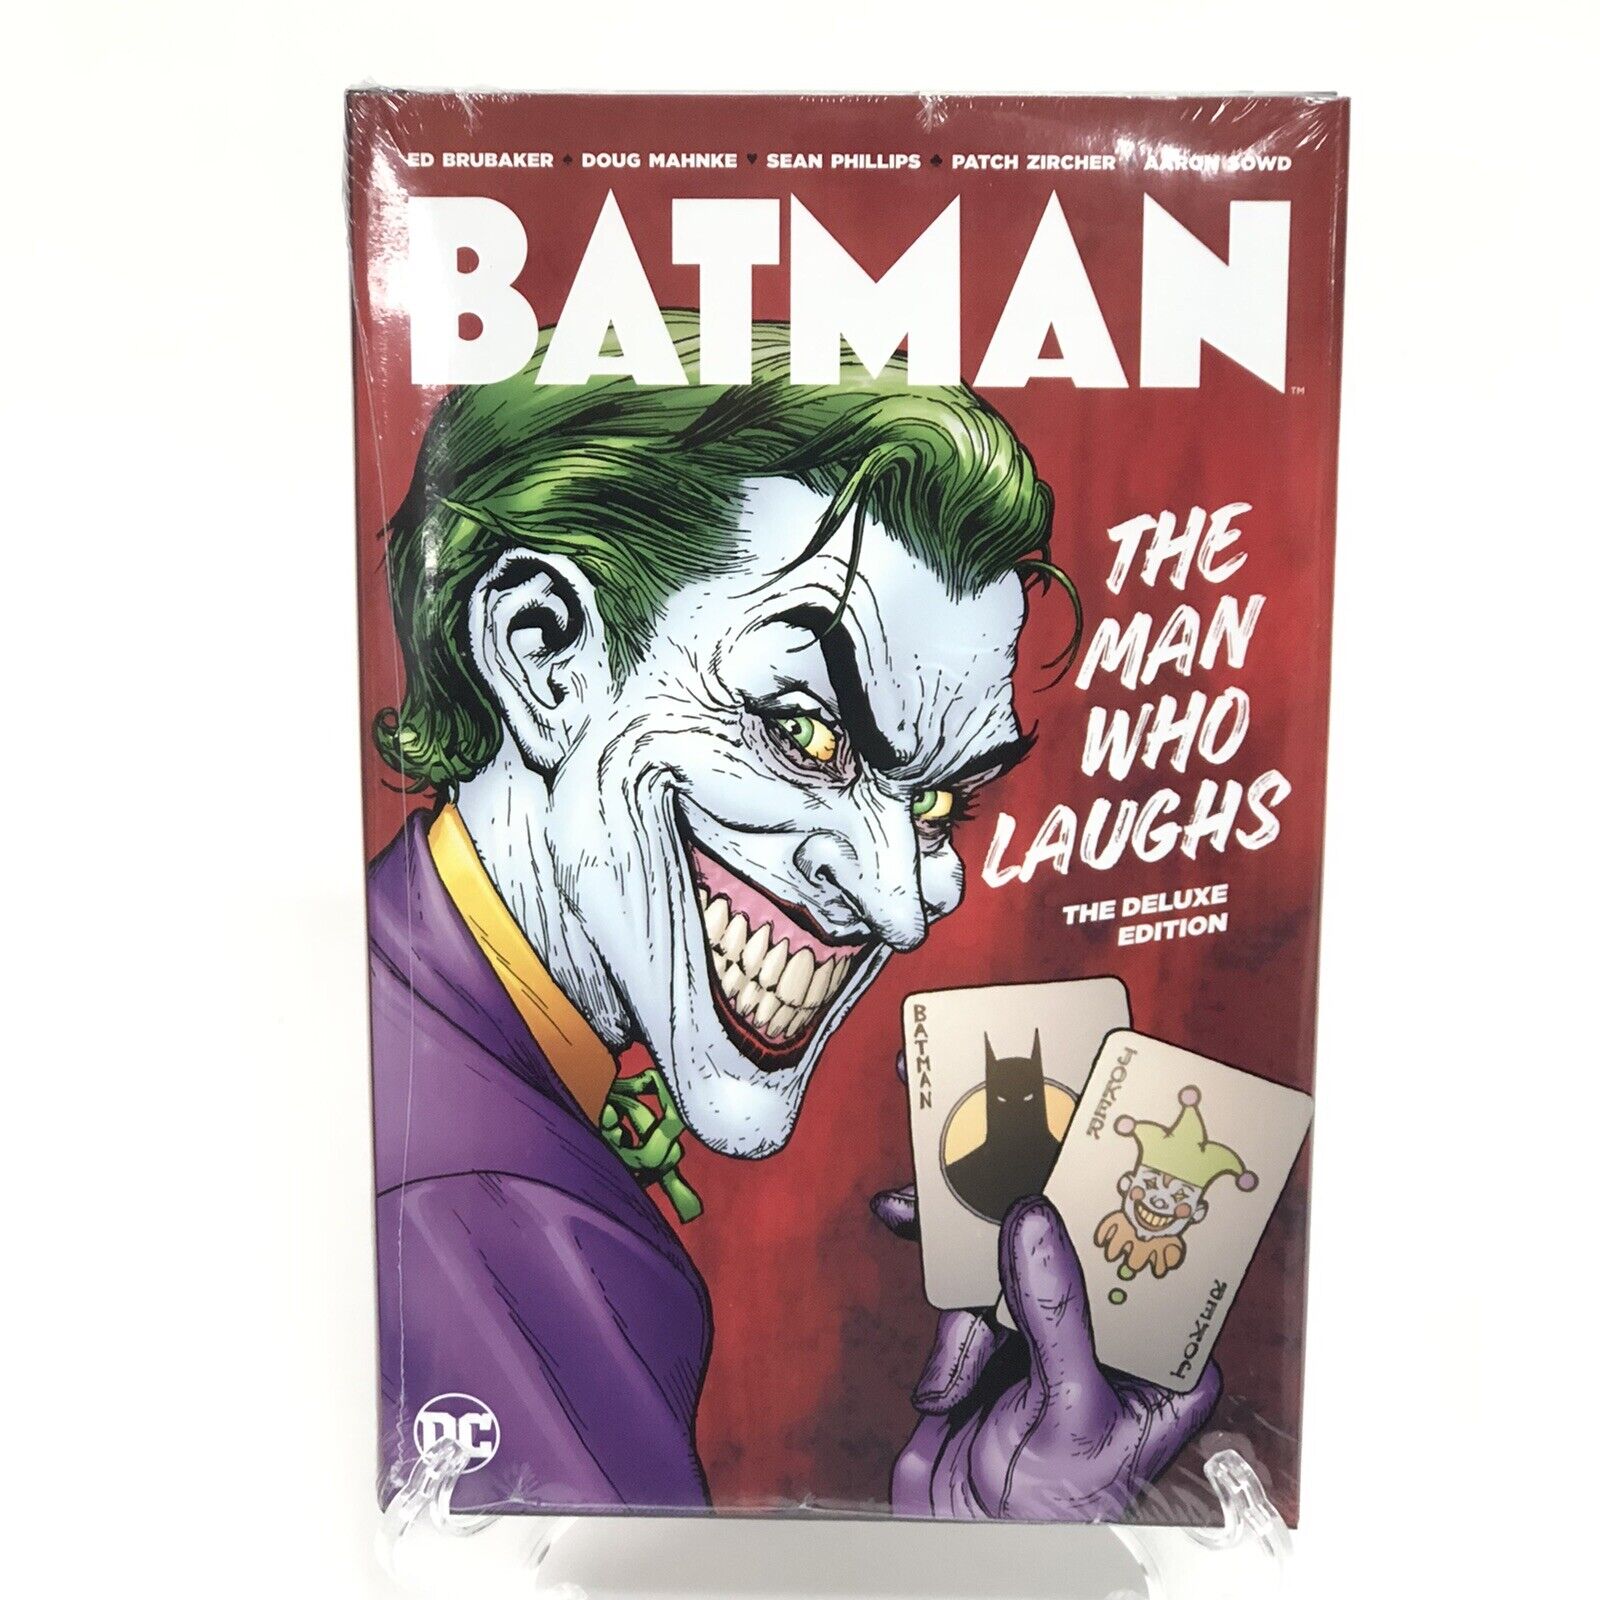 Batman The Man Who Laughs Deluxe Edition New DC Comics HC Hardcover Sealed